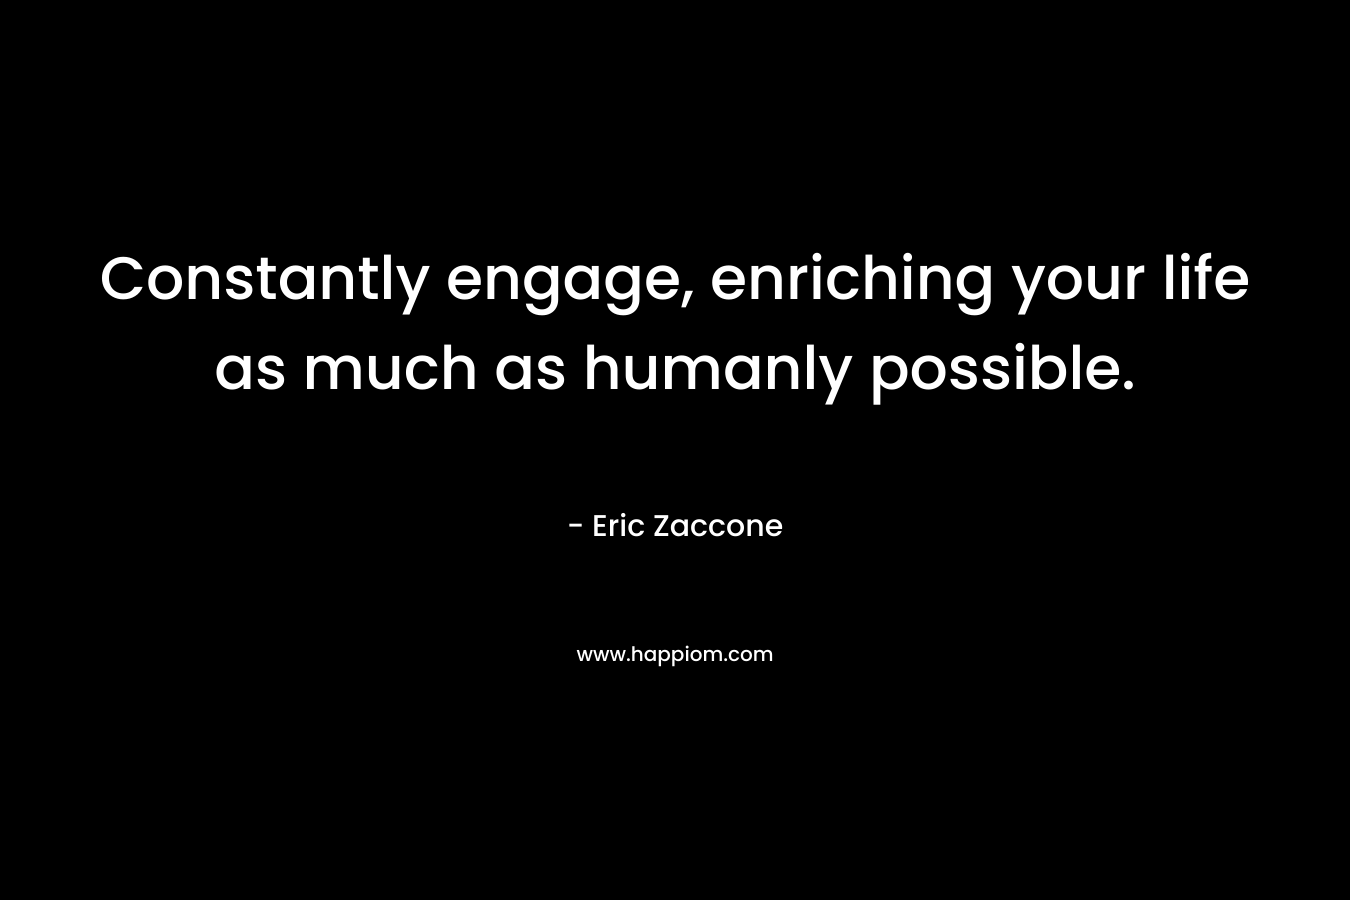 Constantly engage, enriching your life as much as humanly possible. – Eric Zaccone